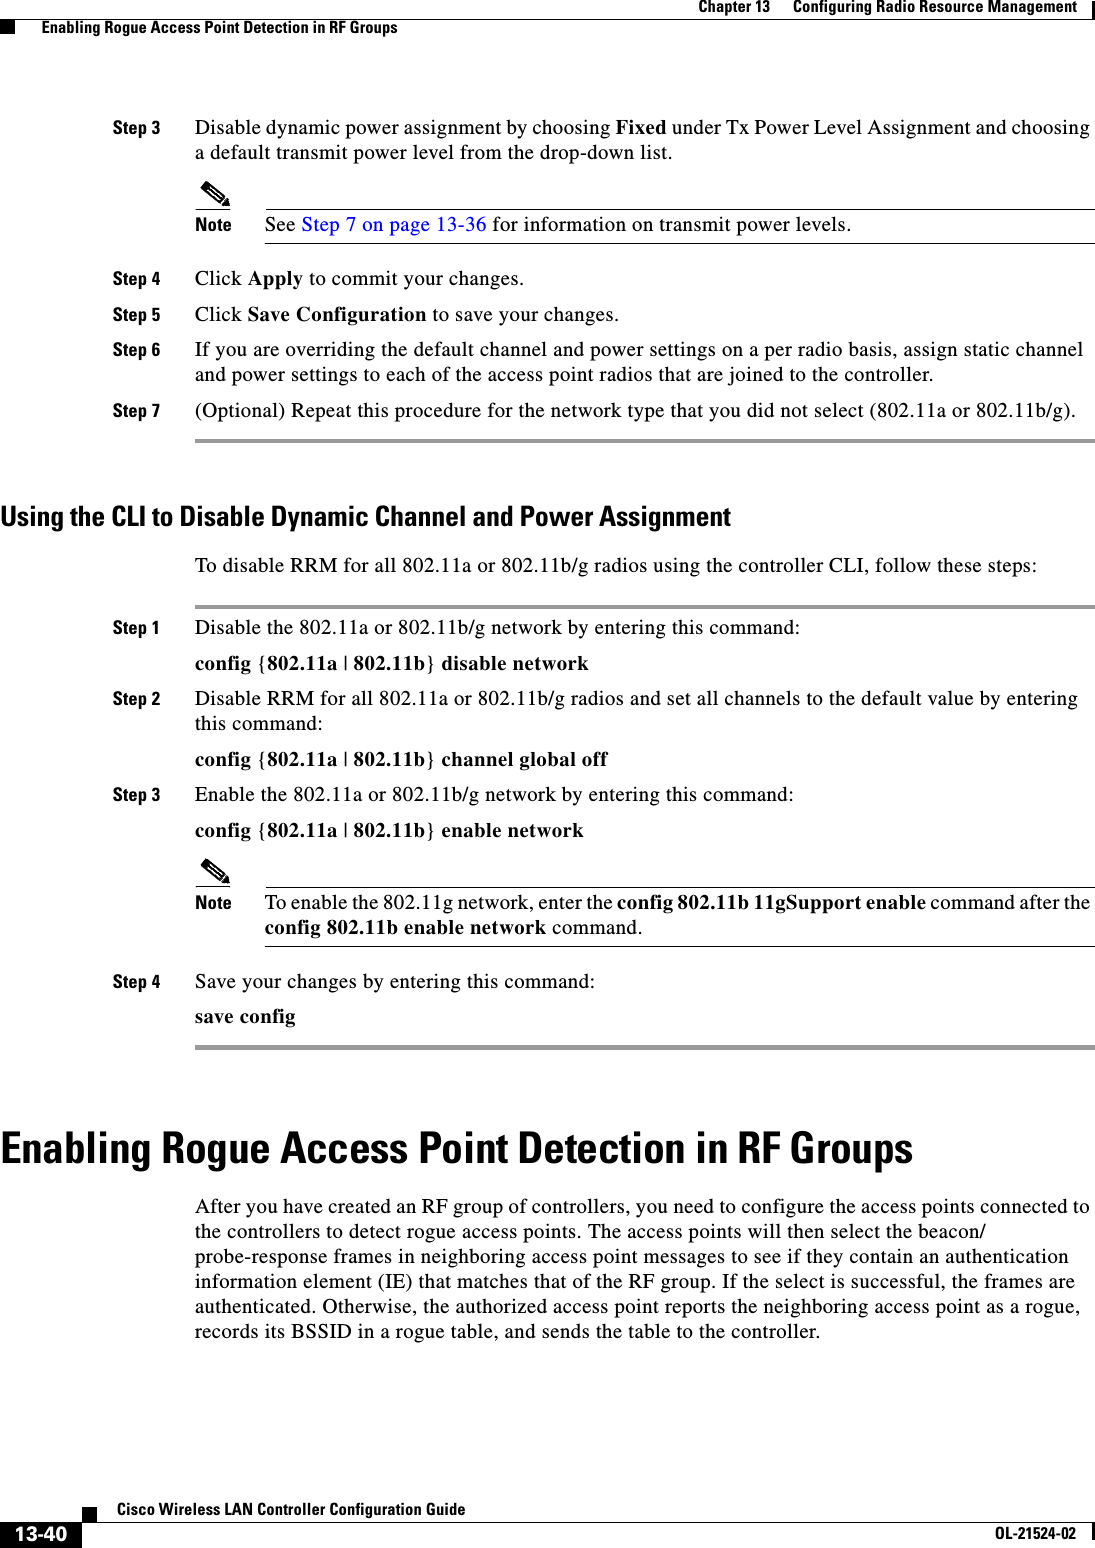  13-40Cisco Wireless LAN Controller Configuration GuideOL-21524-02Chapter 13      Configuring Radio Resource Management  Enabling Rogue Access Point Detection in RF GroupsStep 3 Disable dynamic power assignment by choosing Fixed under Tx Power Level Assignment and choosing a default transmit power level from the drop-down list.Note See Step 7 on page 13-36 for information on transmit power levels.Step 4 Click Apply to commit your changes.Step 5 Click Save Configuration to save your changes.Step 6 If you are overriding the default channel and power settings on a per radio basis, assign static channel and power settings to each of the access point radios that are joined to the controller.Step 7 (Optional) Repeat this procedure for the network type that you did not select (802.11a or 802.11b/g).Using the CLI to Disable Dynamic Channel and Power AssignmentTo disable RRM for all 802.11a or 802.11b/g radios using the controller CLI, follow these steps:Step 1 Disable the 802.11a or 802.11b/g network by entering this command:config {802.11a | 802.11b} disable networkStep 2 Disable RRM for all 802.11a or 802.11b/g radios and set all channels to the default value by entering this command:config {802.11a | 802.11b} channel global offStep 3 Enable the 802.11a or 802.11b/g network by entering this command:config {802.11a | 802.11b} enable networkNote To enable the 802.11g network, enter the config 802.11b 11gSupport enable command after the config 802.11b enable network command.Step 4 Save your changes by entering this command:save configEnabling Rogue Access Point Detection in RF GroupsAfter you have created an RF group of controllers, you need to configure the access points connected to the controllers to detect rogue access points. The access points will then select the beacon/ probe-response frames in neighboring access point messages to see if they contain an authentication information element (IE) that matches that of the RF group. If the select is successful, the frames are authenticated. Otherwise, the authorized access point reports the neighboring access point as a rogue, records its BSSID in a rogue table, and sends the table to the controller.